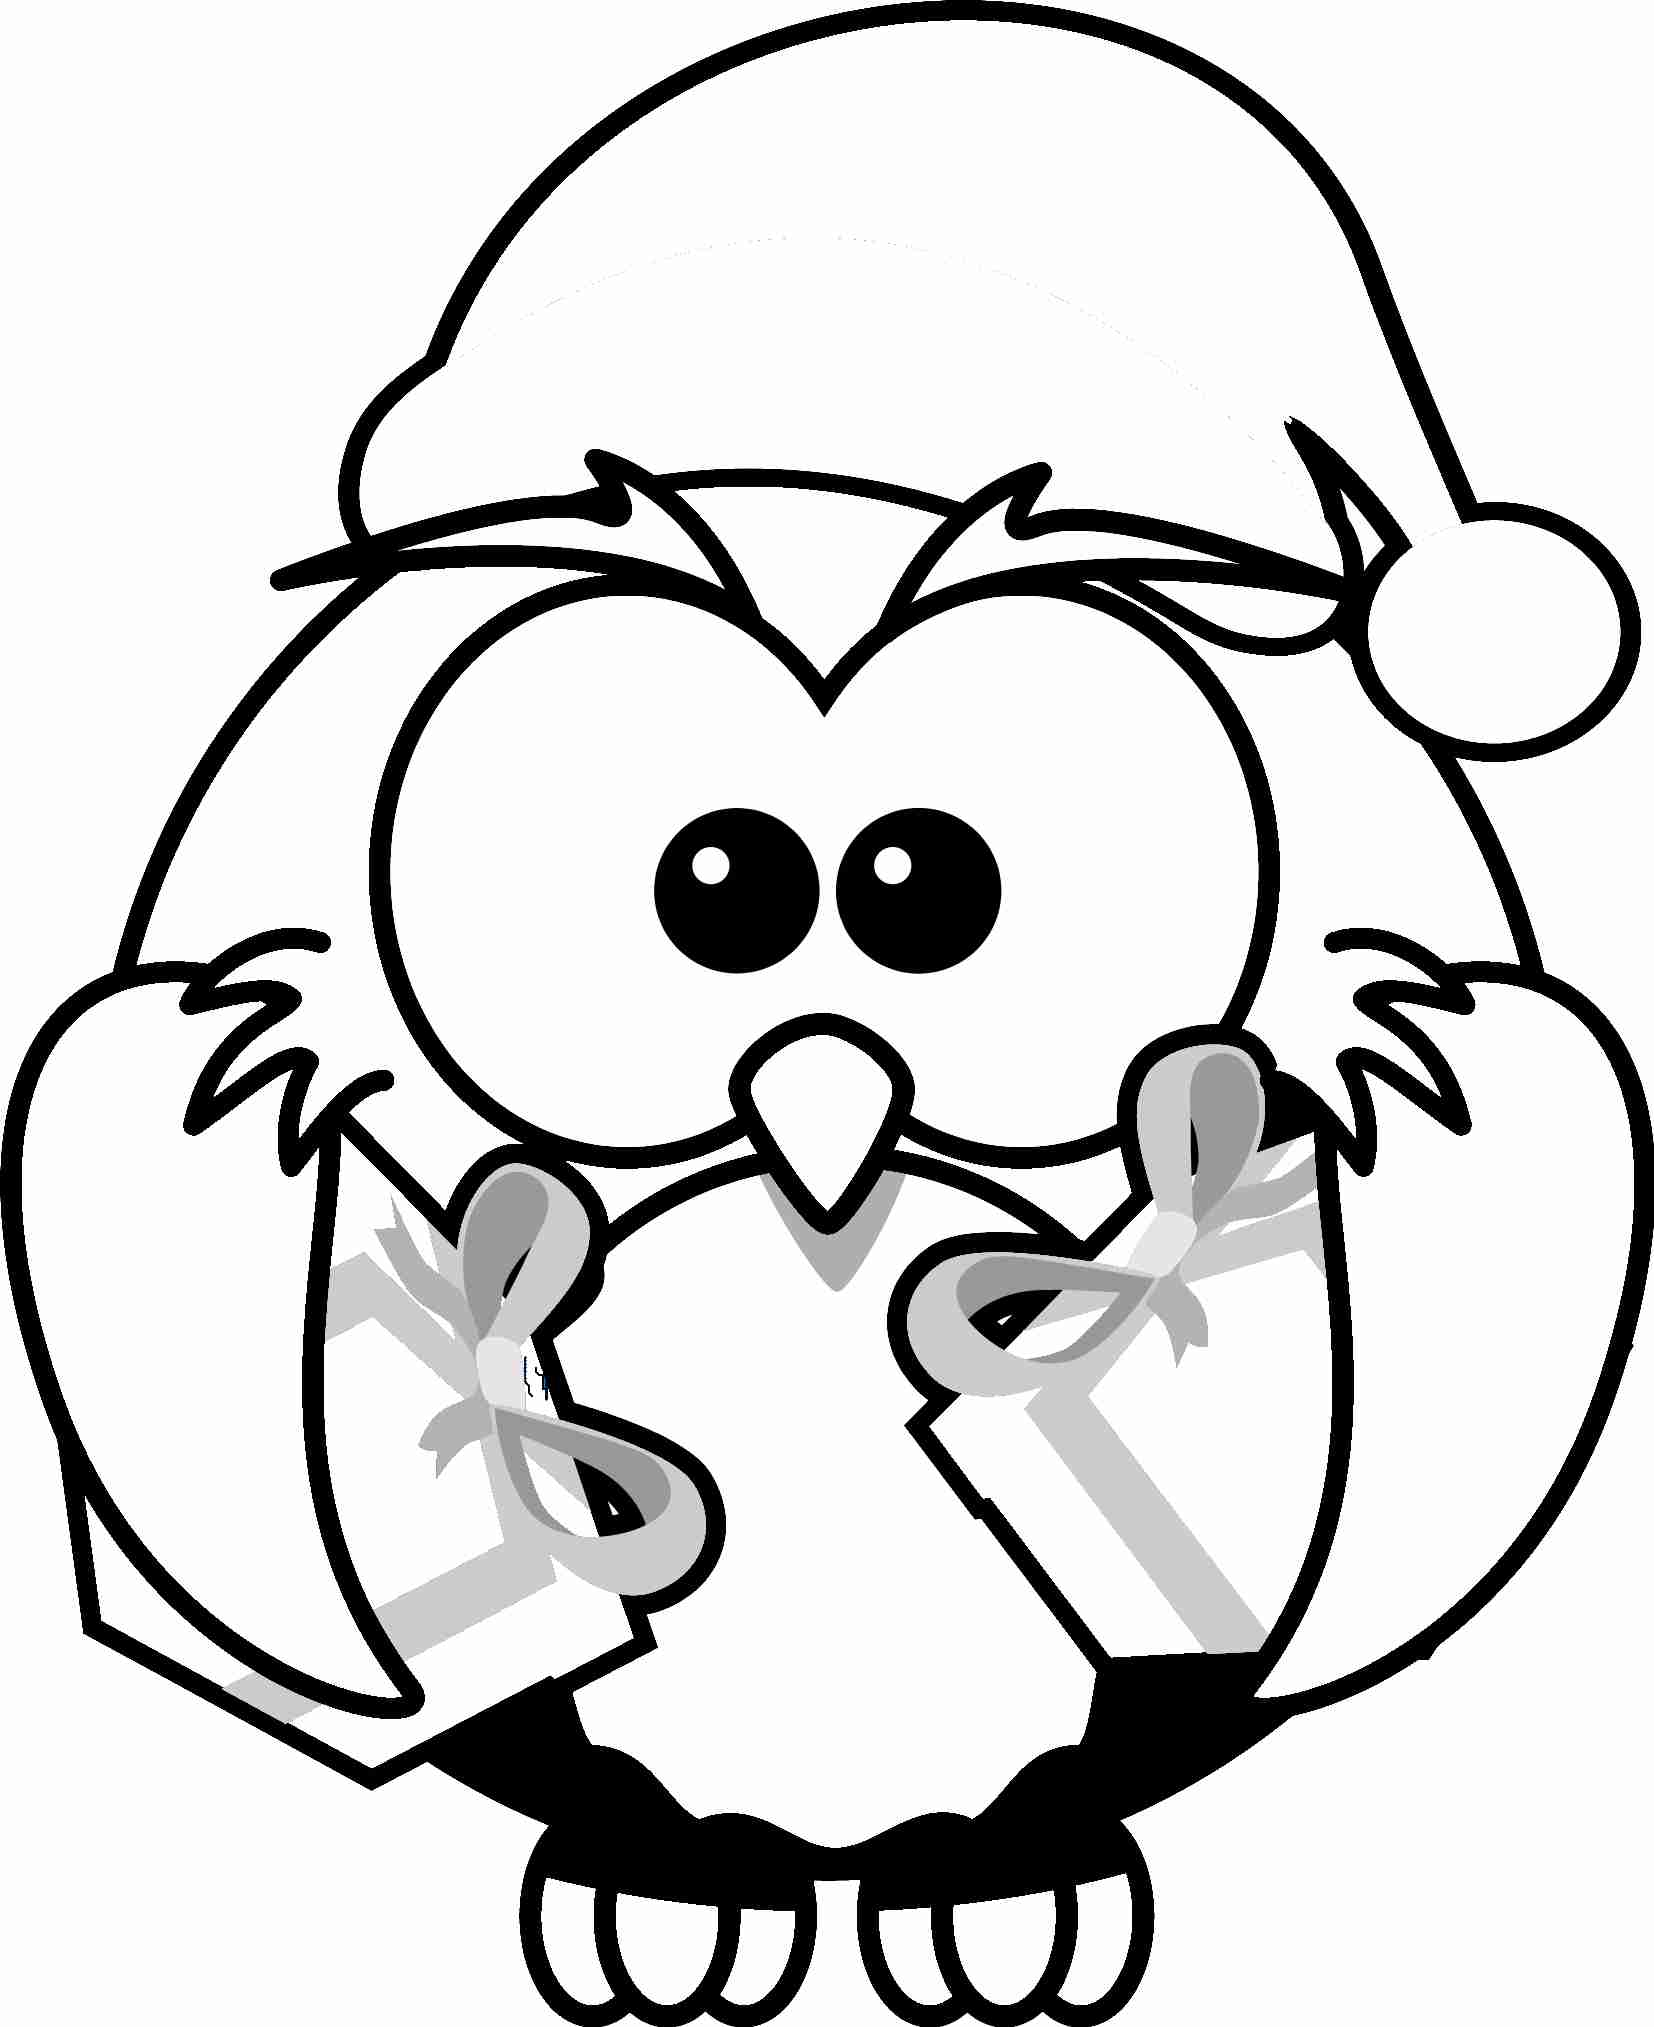 29-christmas-coloring-pages-easy-printable-png-colorist